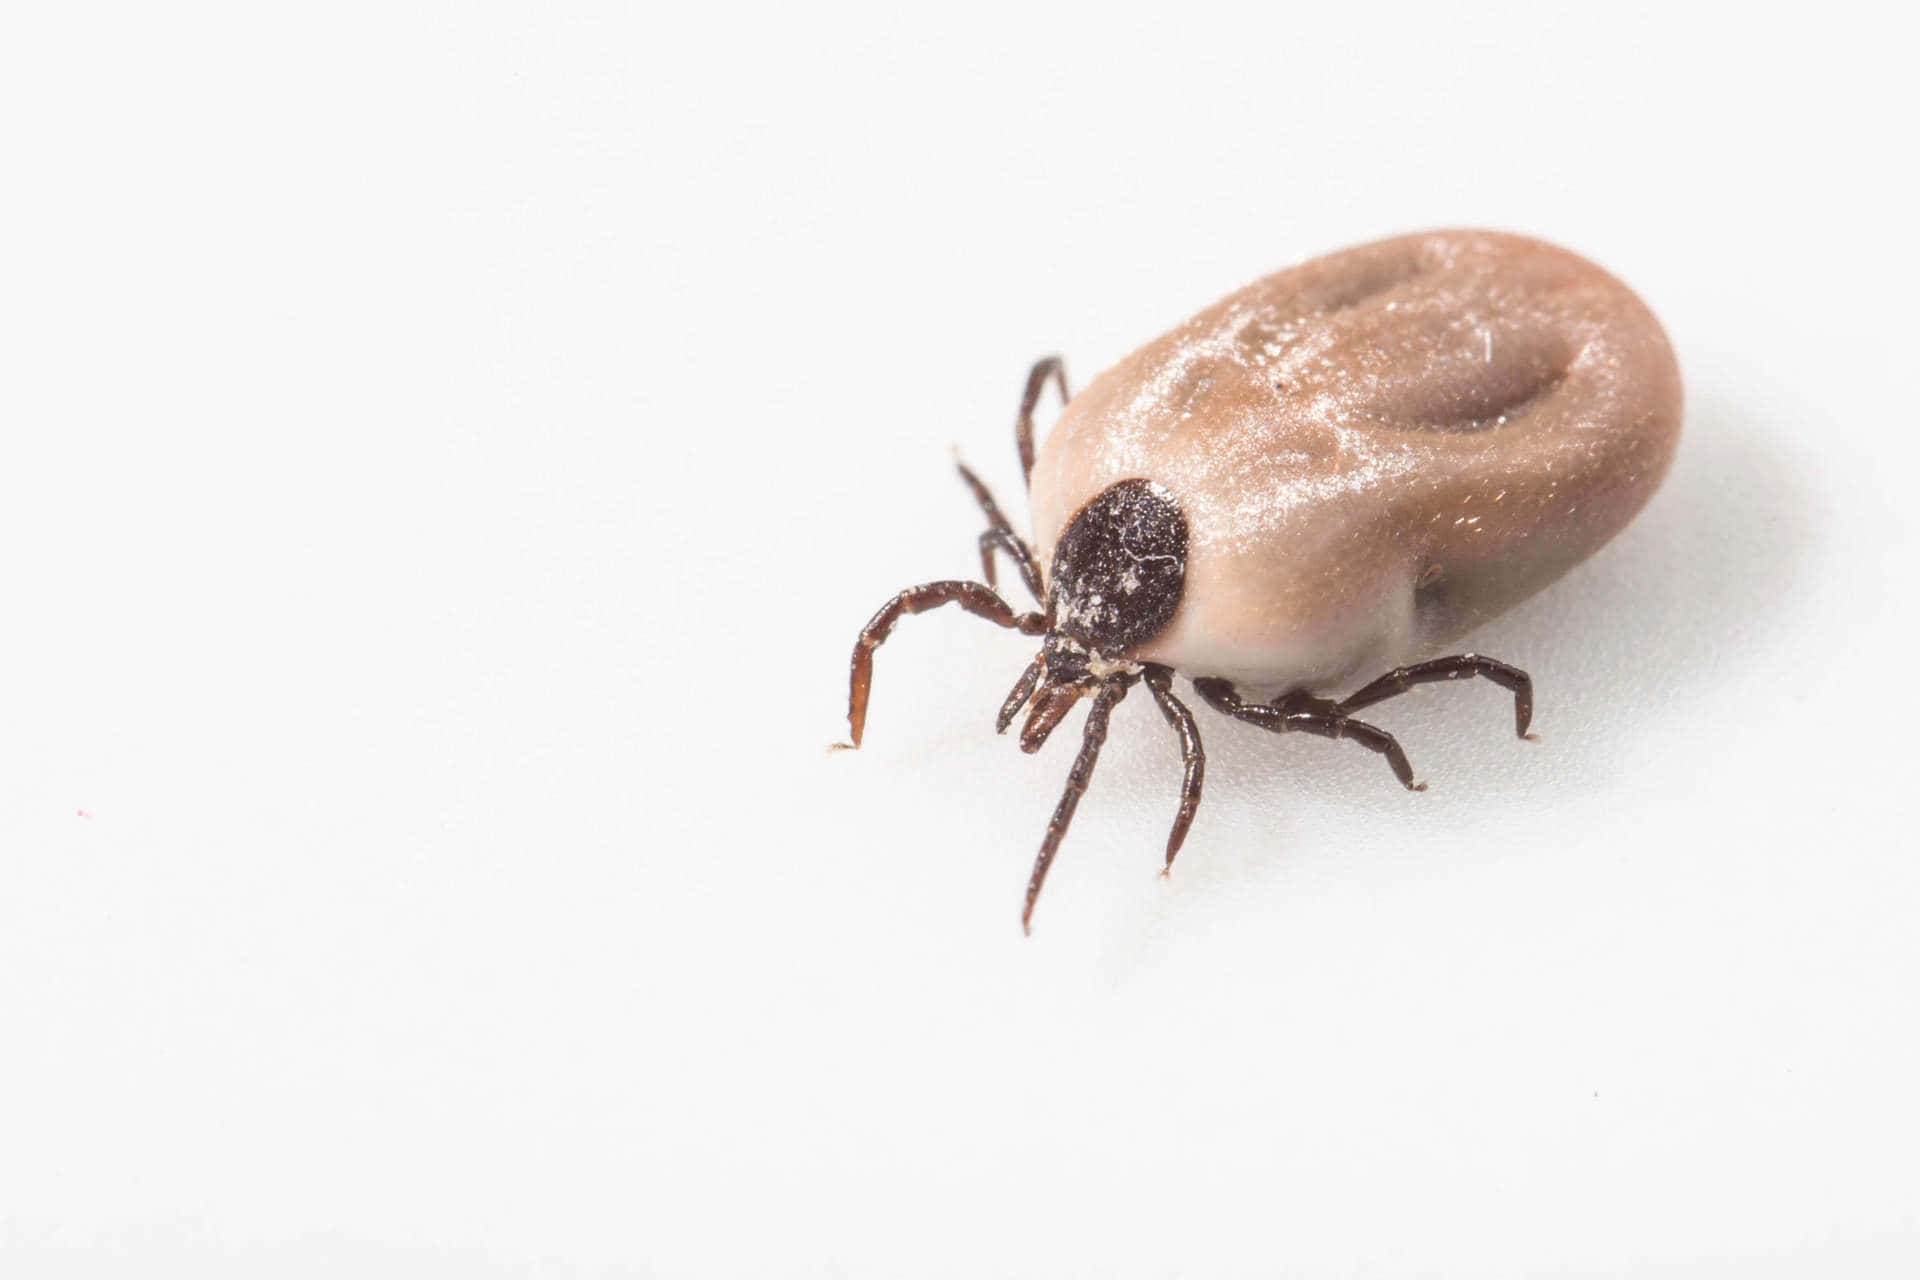 Close-up View of a Tick